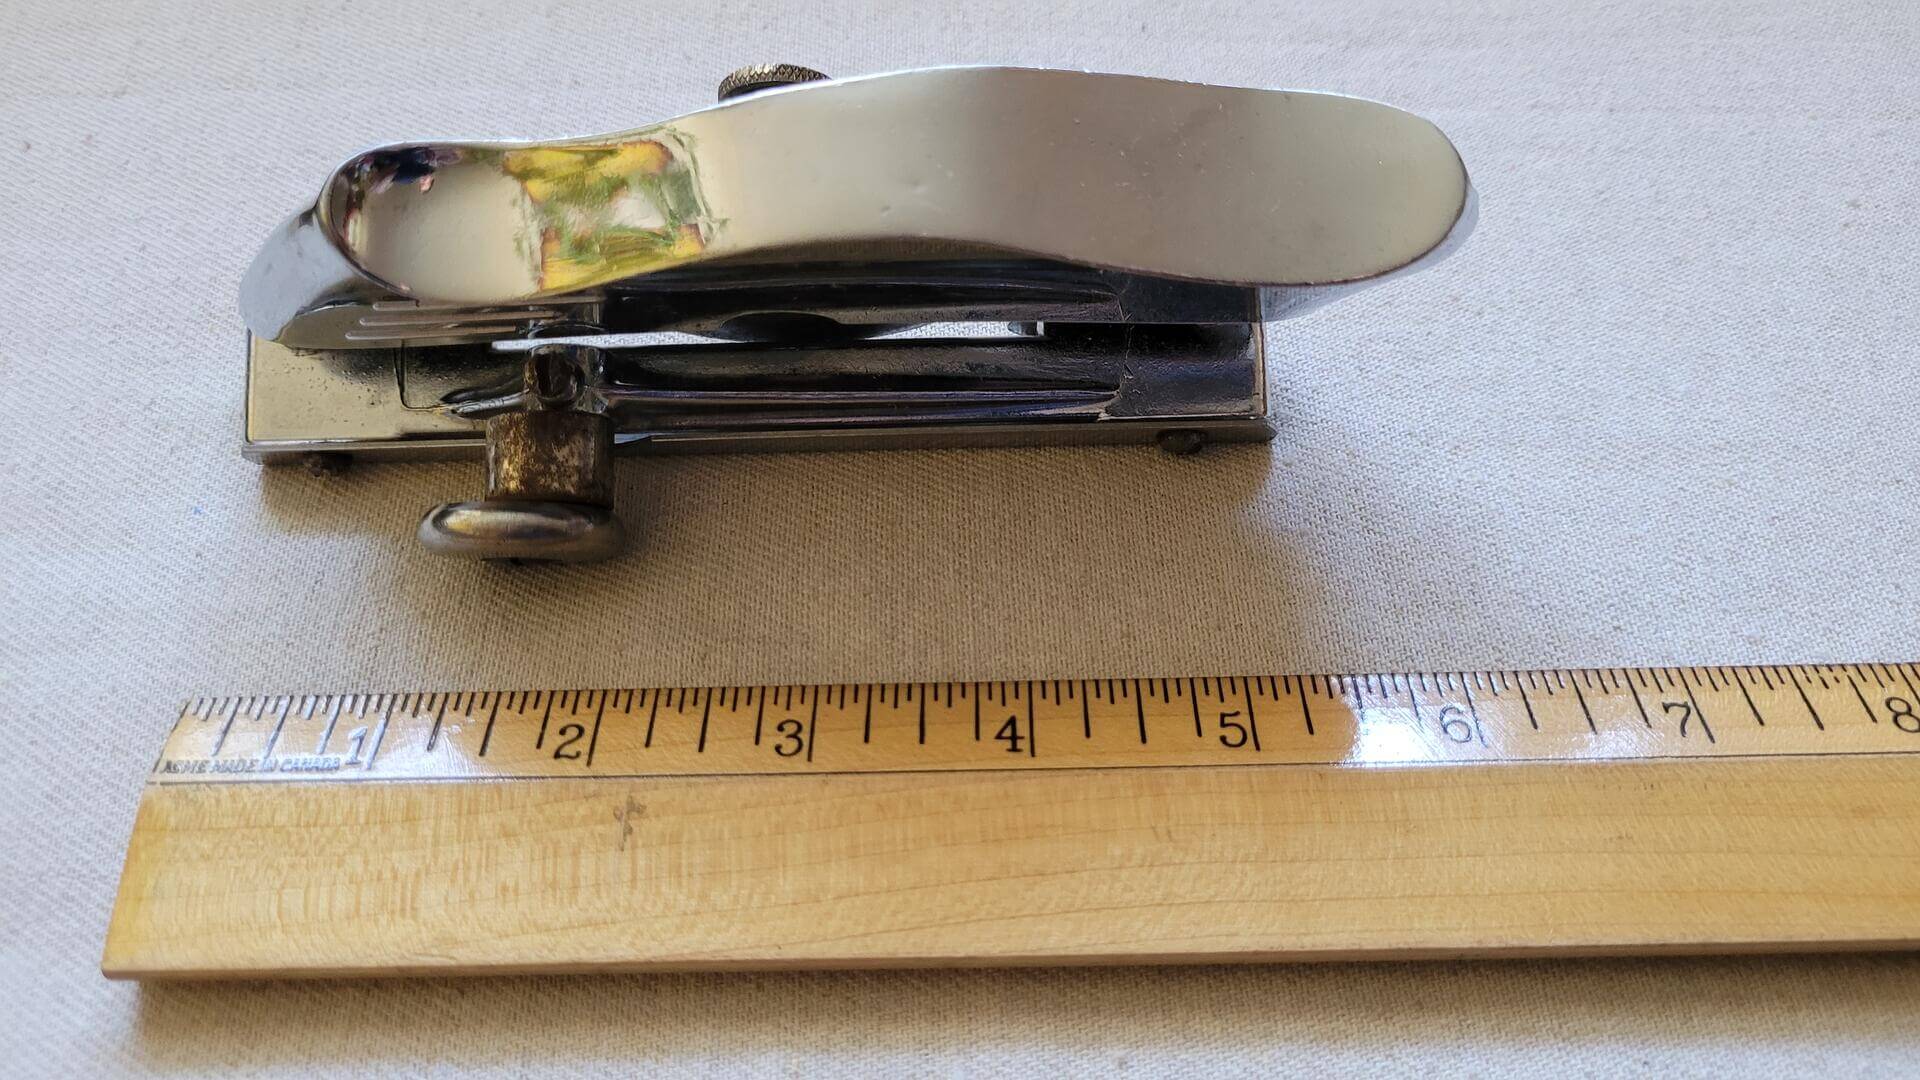 Antique 1930s Hyde Mfg. Co. No. 777 Century wallpaper trimmer Pat 1869369, beautiful industrial and ergonomic tool design built in Southbridge, Mass. Vintage made in USA collectible Art Deco paper hanger's tool